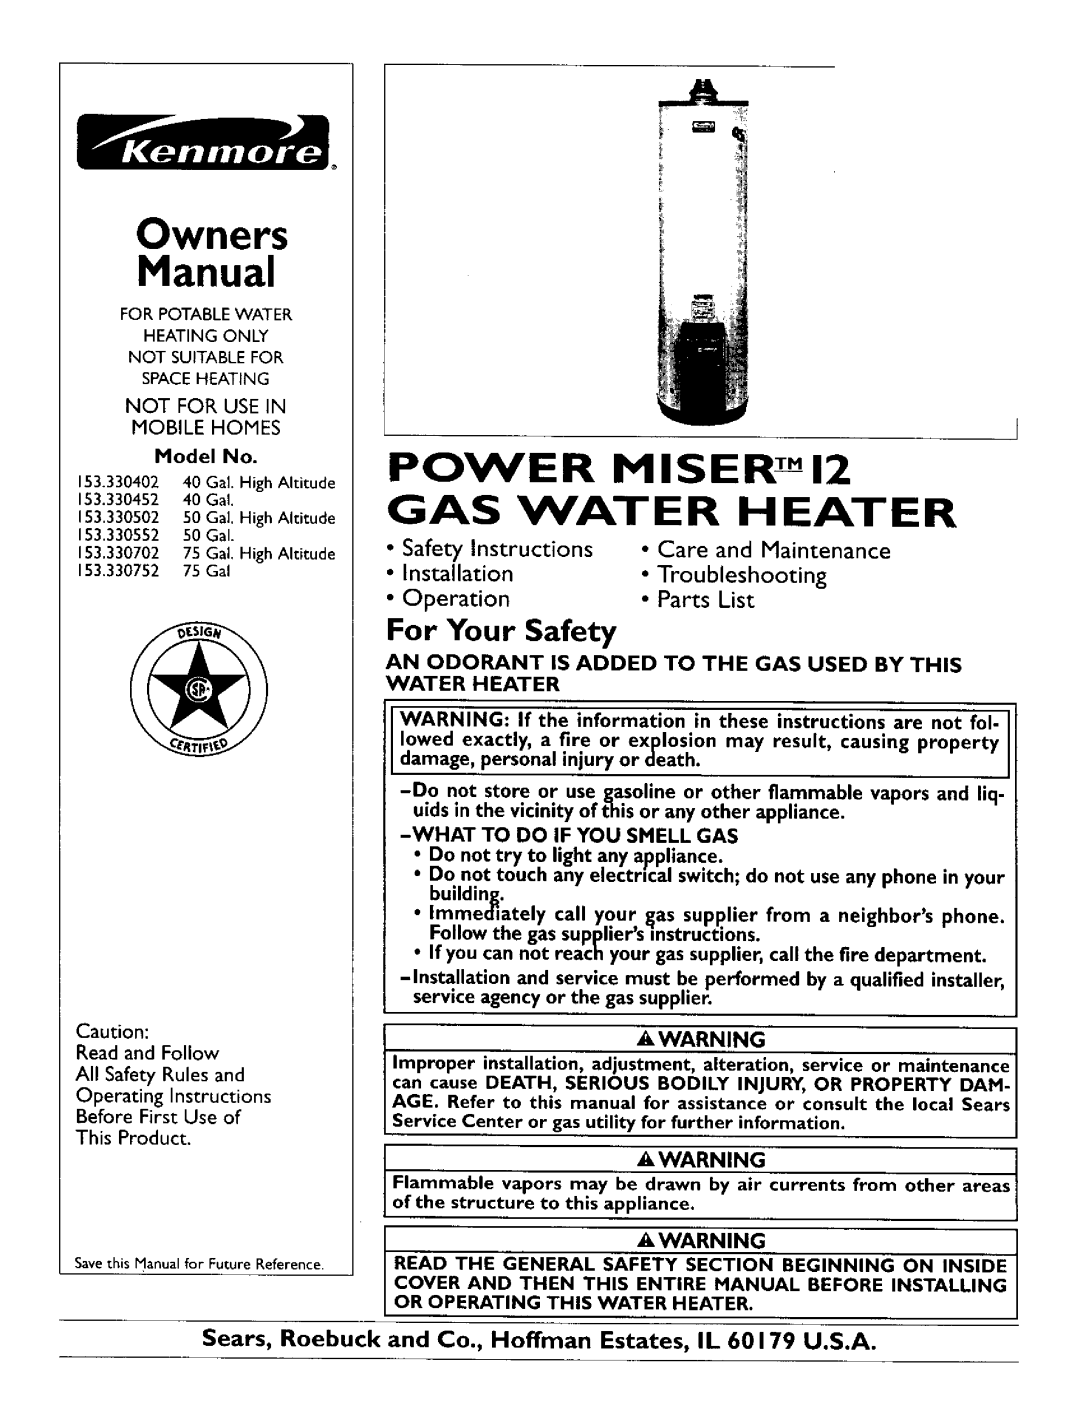 Kenmore 153.330752, 153.330502 owner manual For Your Safety, Installation, Operation, POWER MISERT--M12 GAS WATER HEATER 